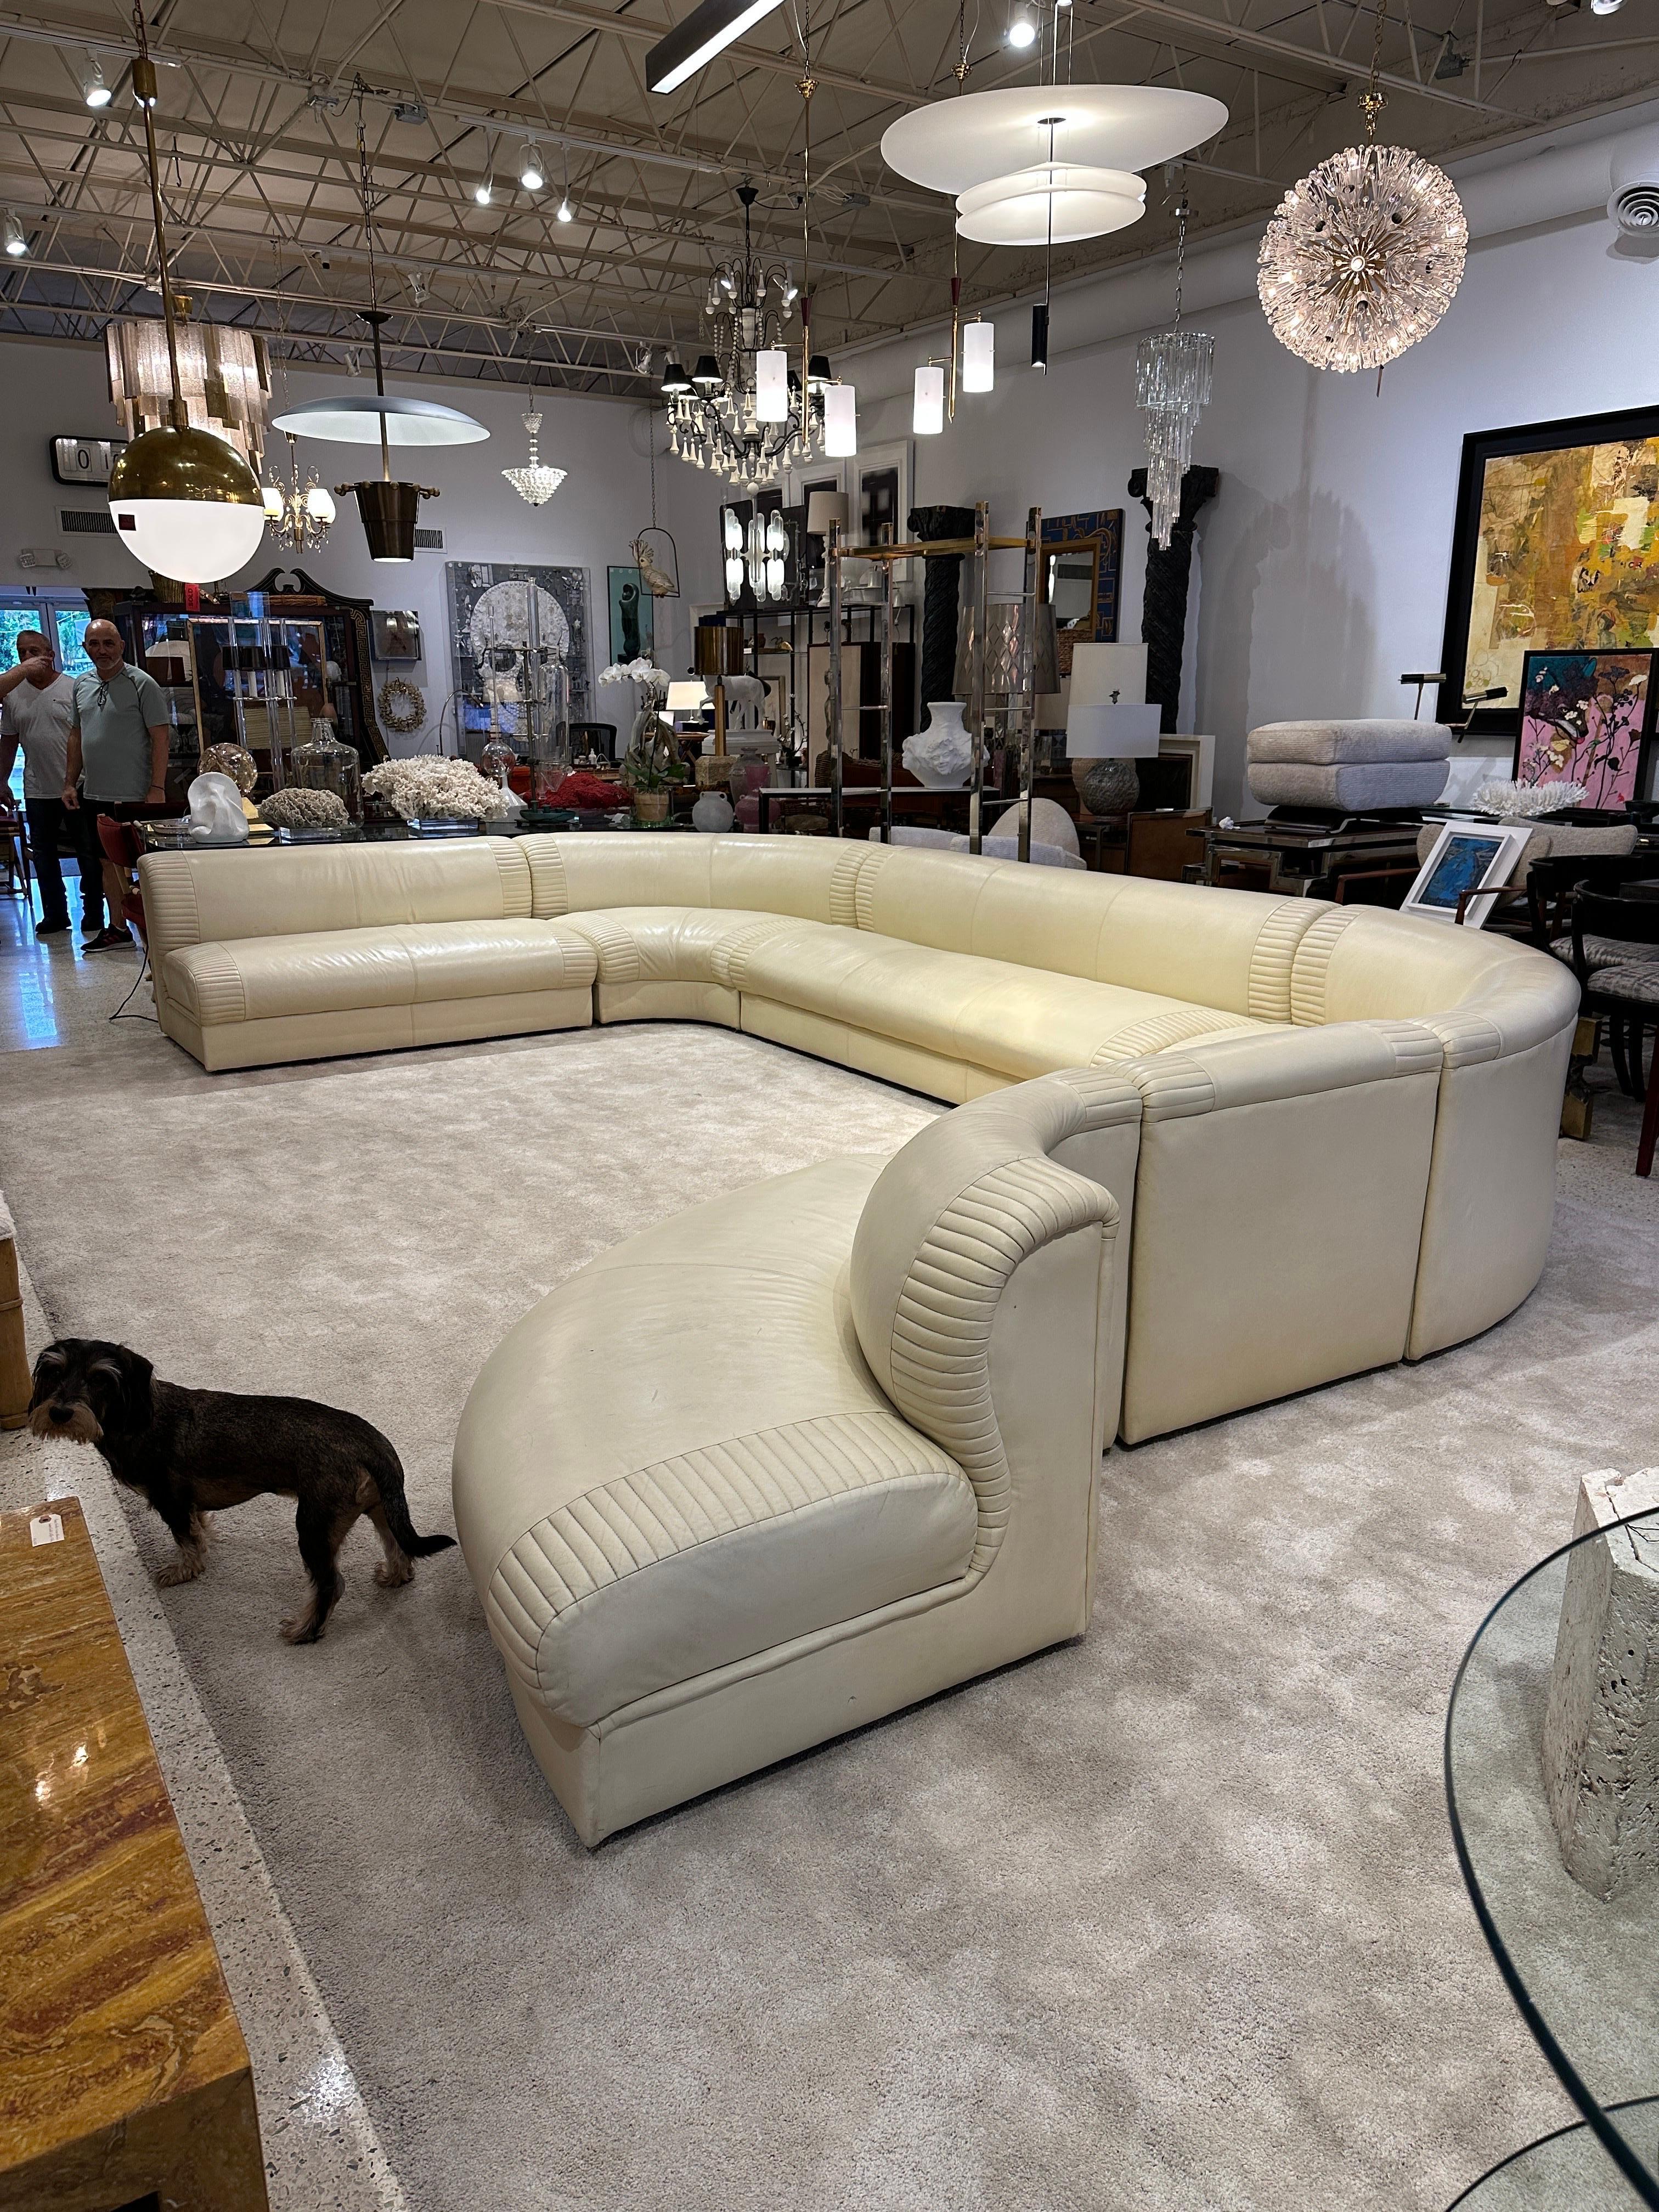 This is an INCREDIBLE 6 piece sectional sofa in buttery soft vanilla tone leather made by Weiman. The dimensions AS SHOWN: 203 inches wide, right side depth (front to back) is 130 inches, left side depth is 116 inches. Obviously, can be configured